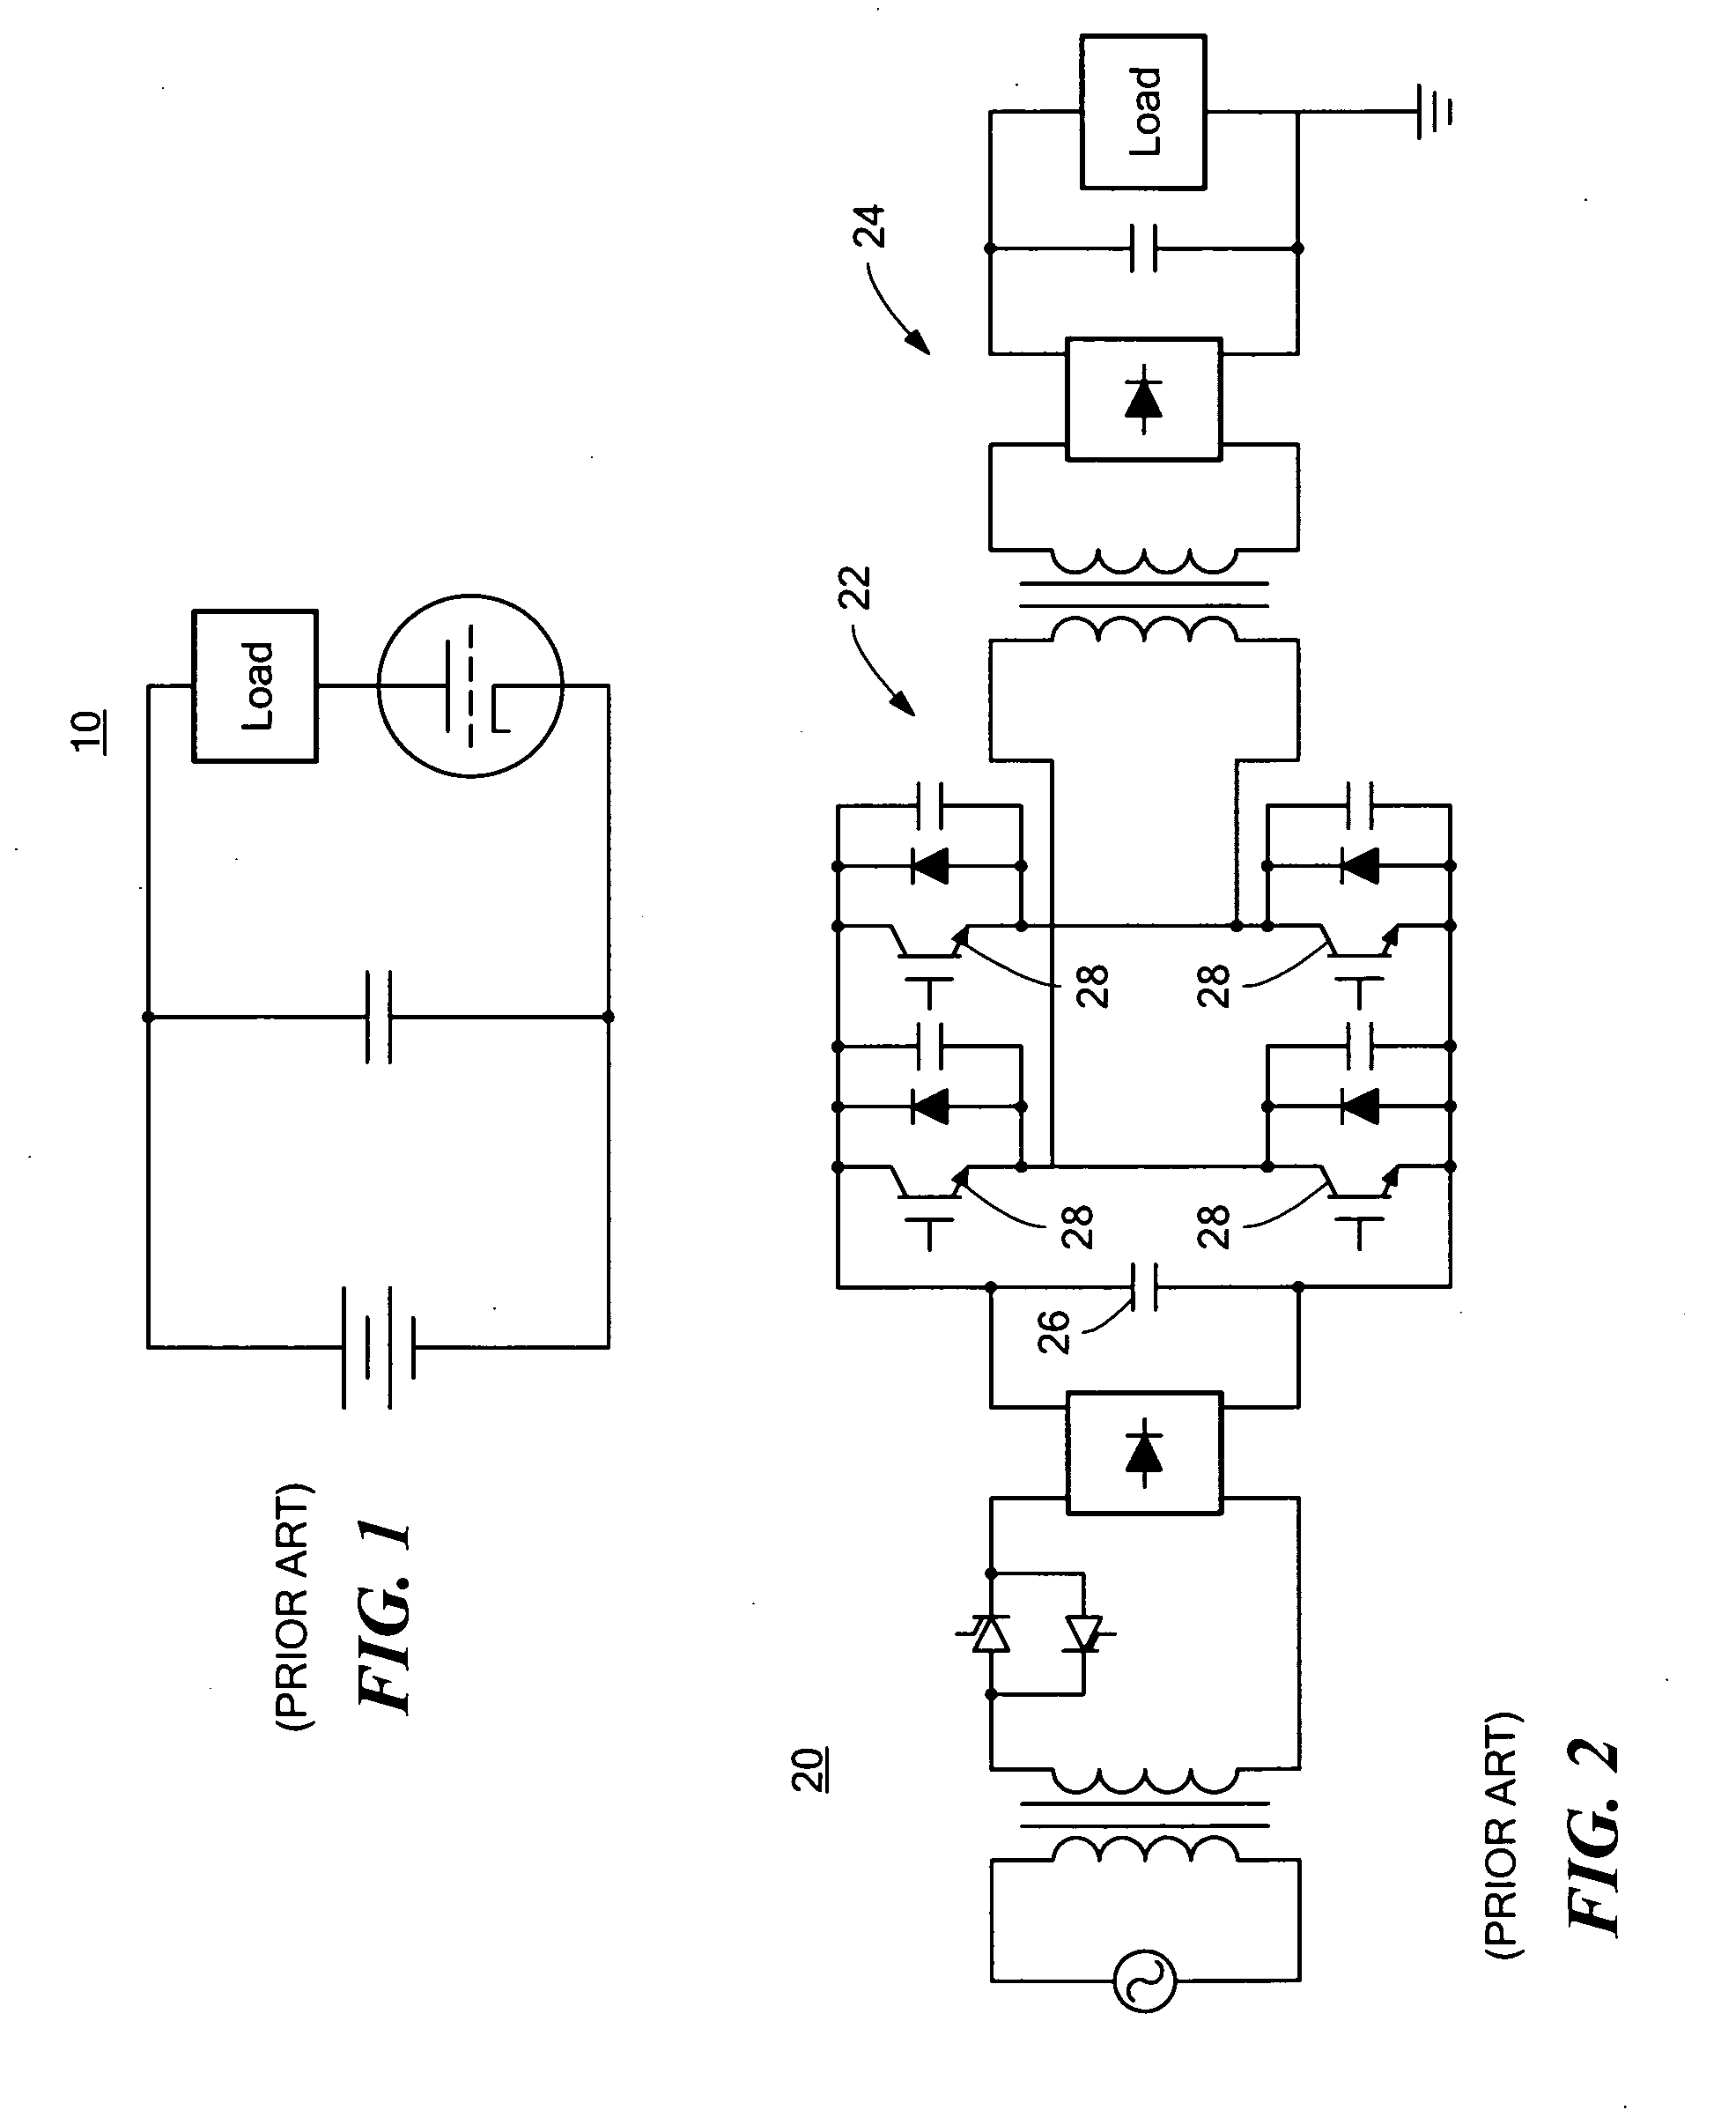 System for regulating the output of a high-voltage, high-power, DC supply